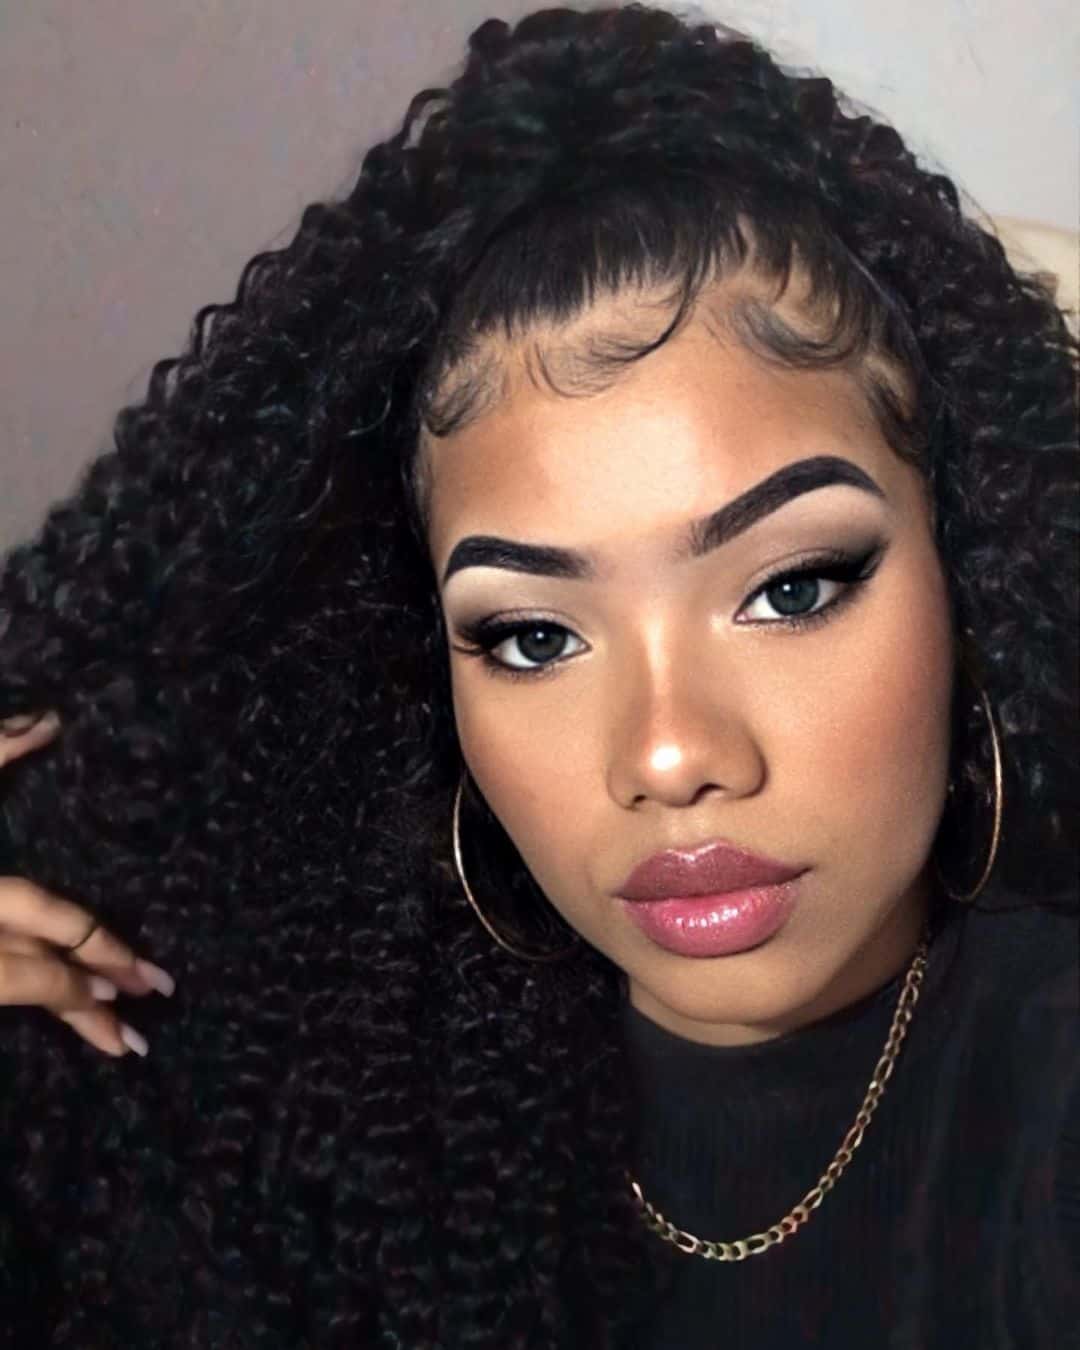 Baby Hair Style Guide: The 12 Different Ways To Style Your Hair | Curl ...